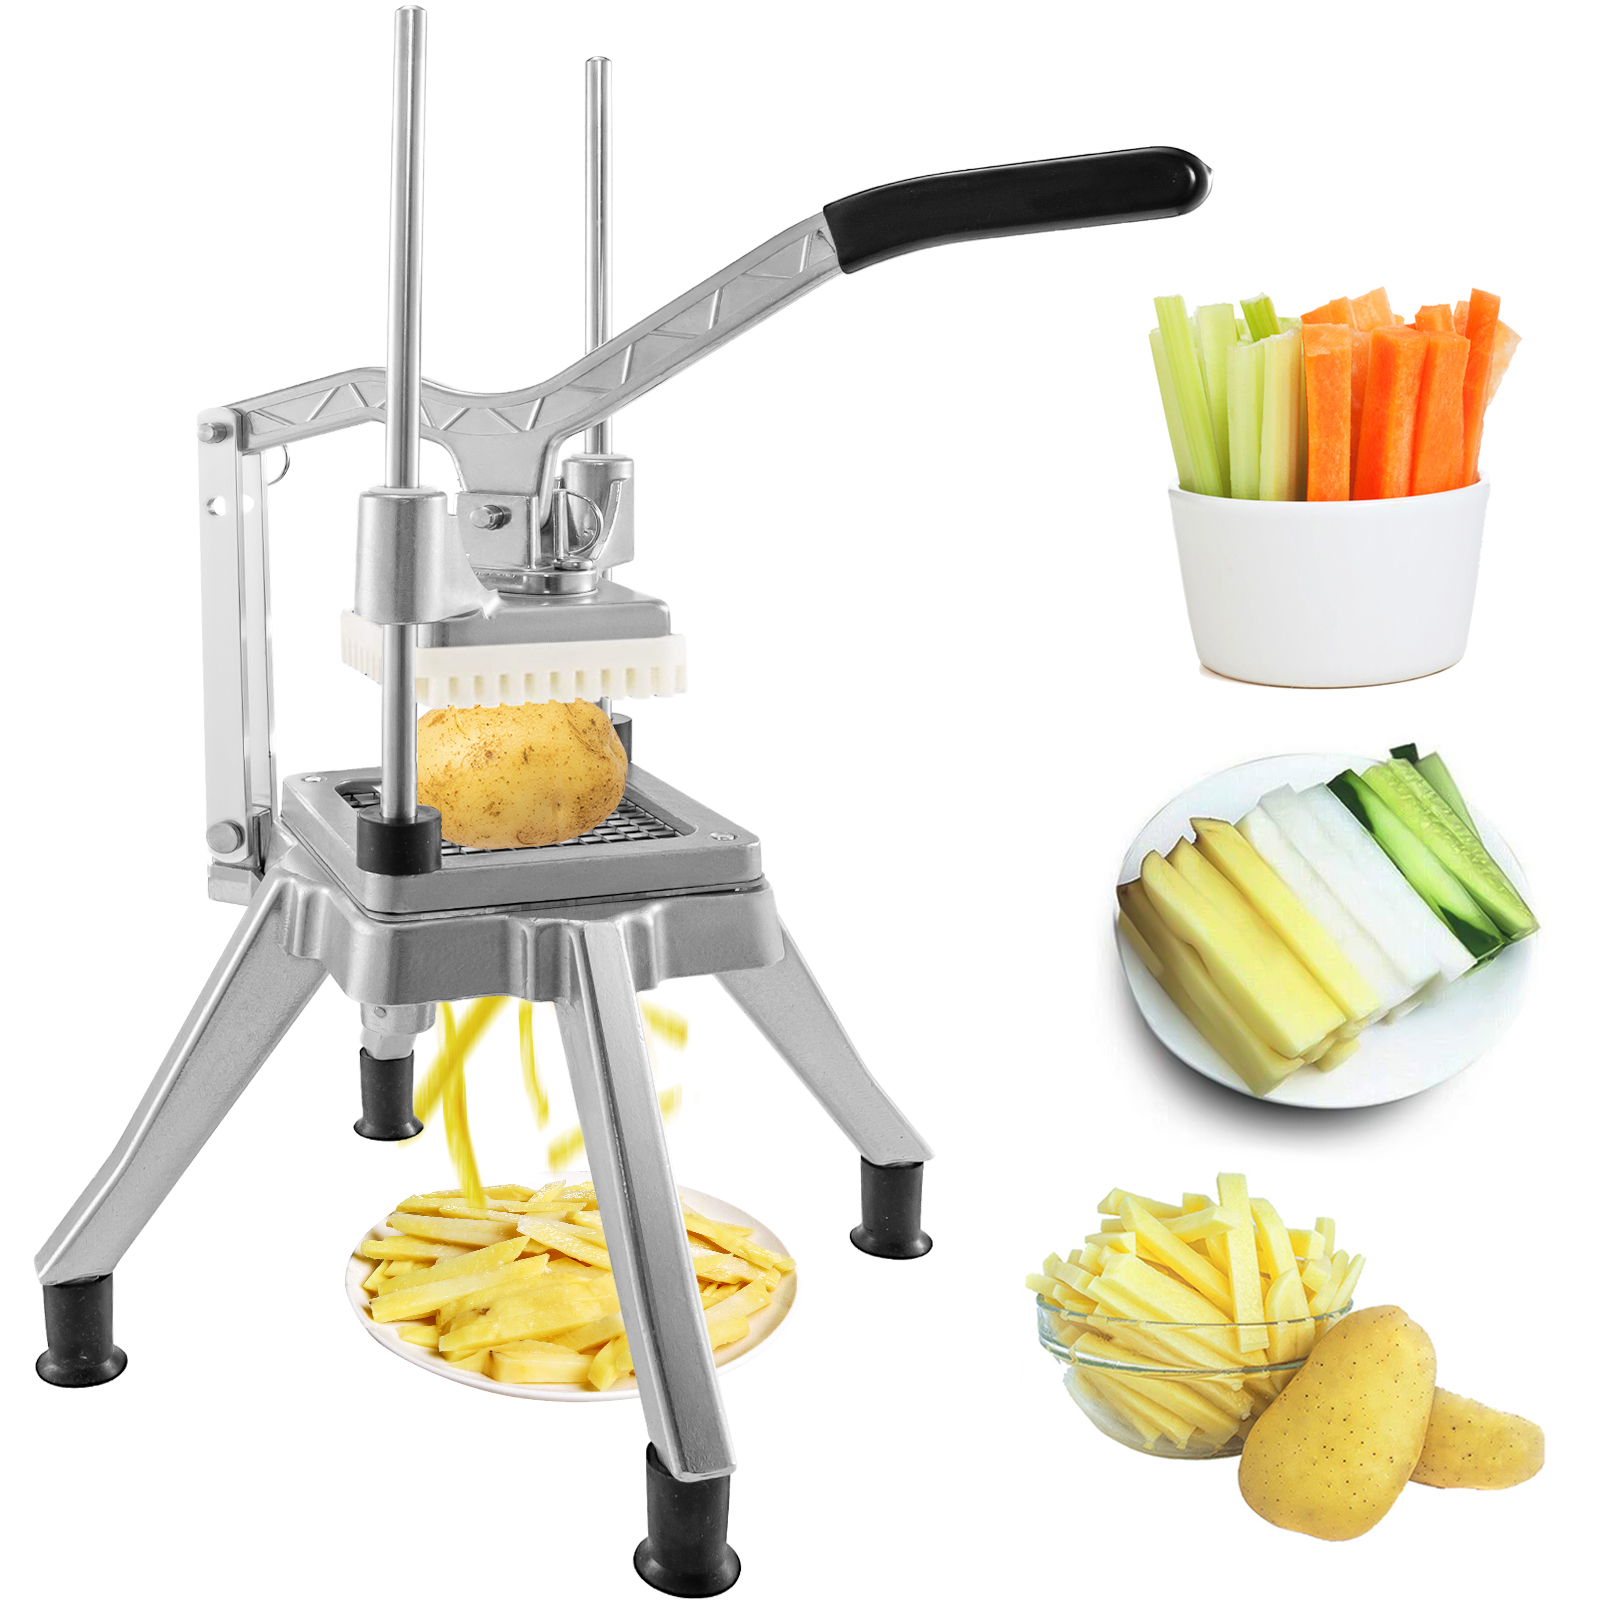 Vegetable Fruit Dicer Cutter With 5 Changable Blades Onion Tomato Chopper Slicer 